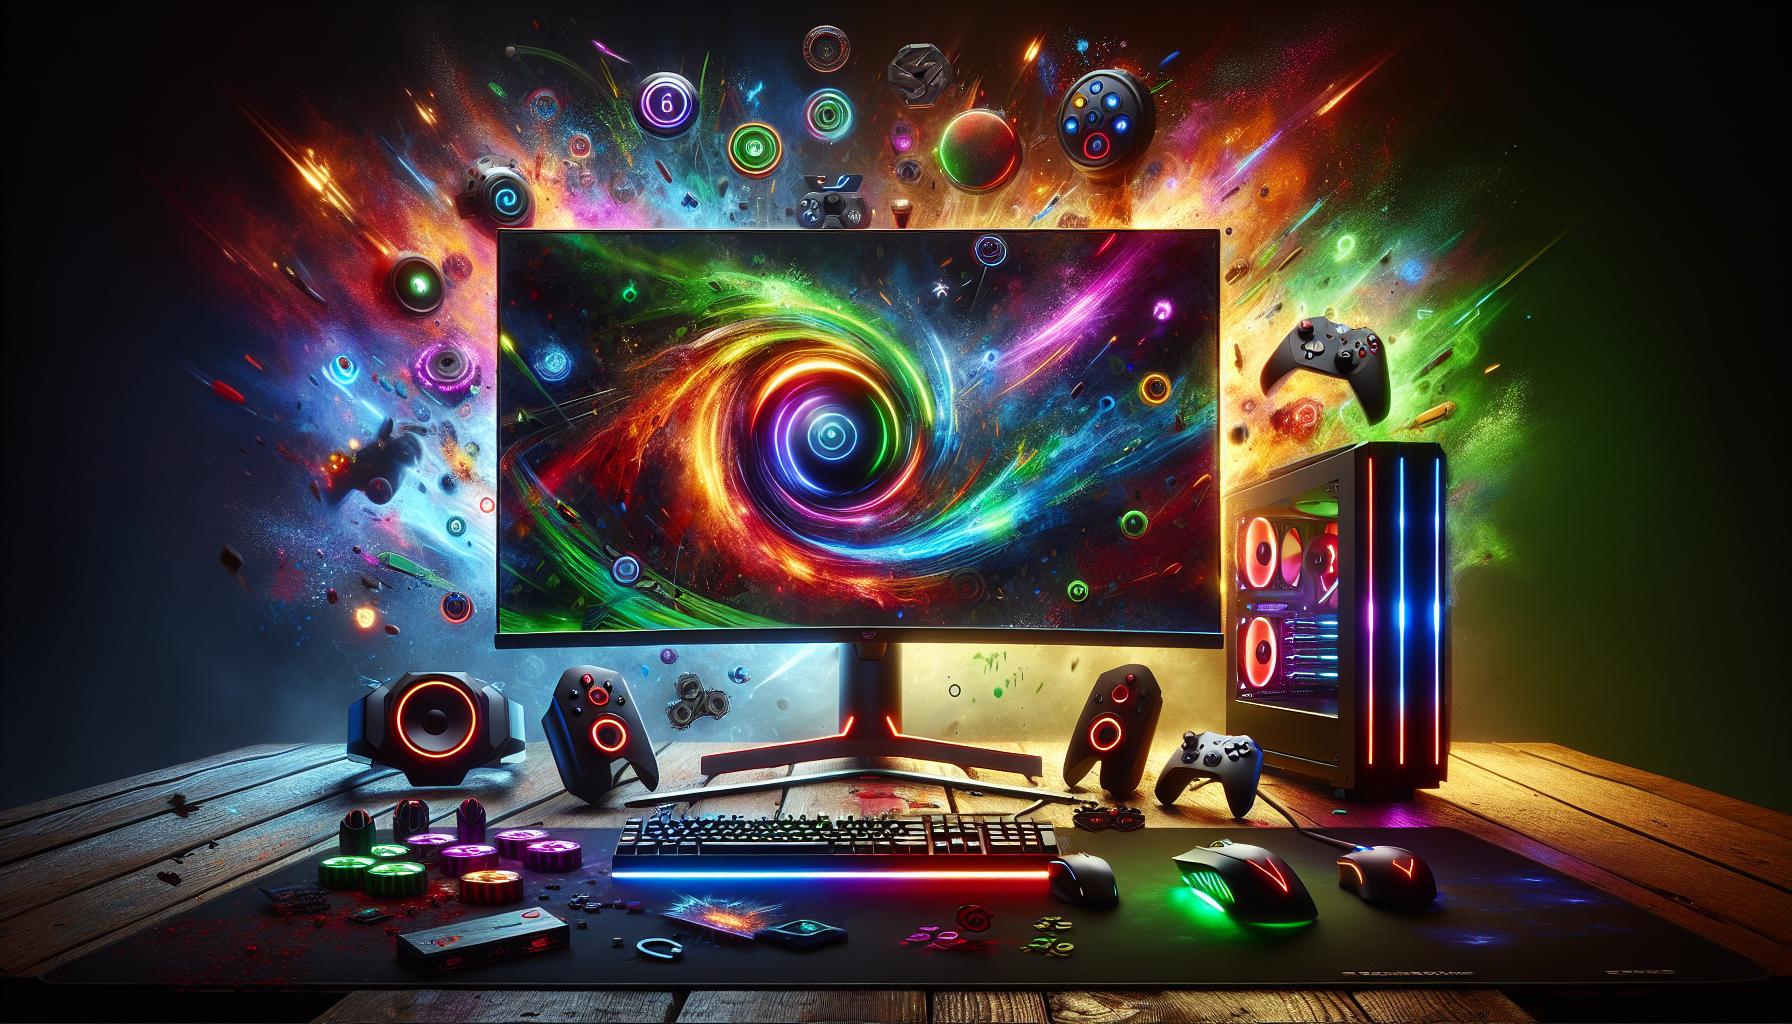 "Top 240Hz Gaming Monitors on Amazon: Analyzing the Best Options" | FinOracle